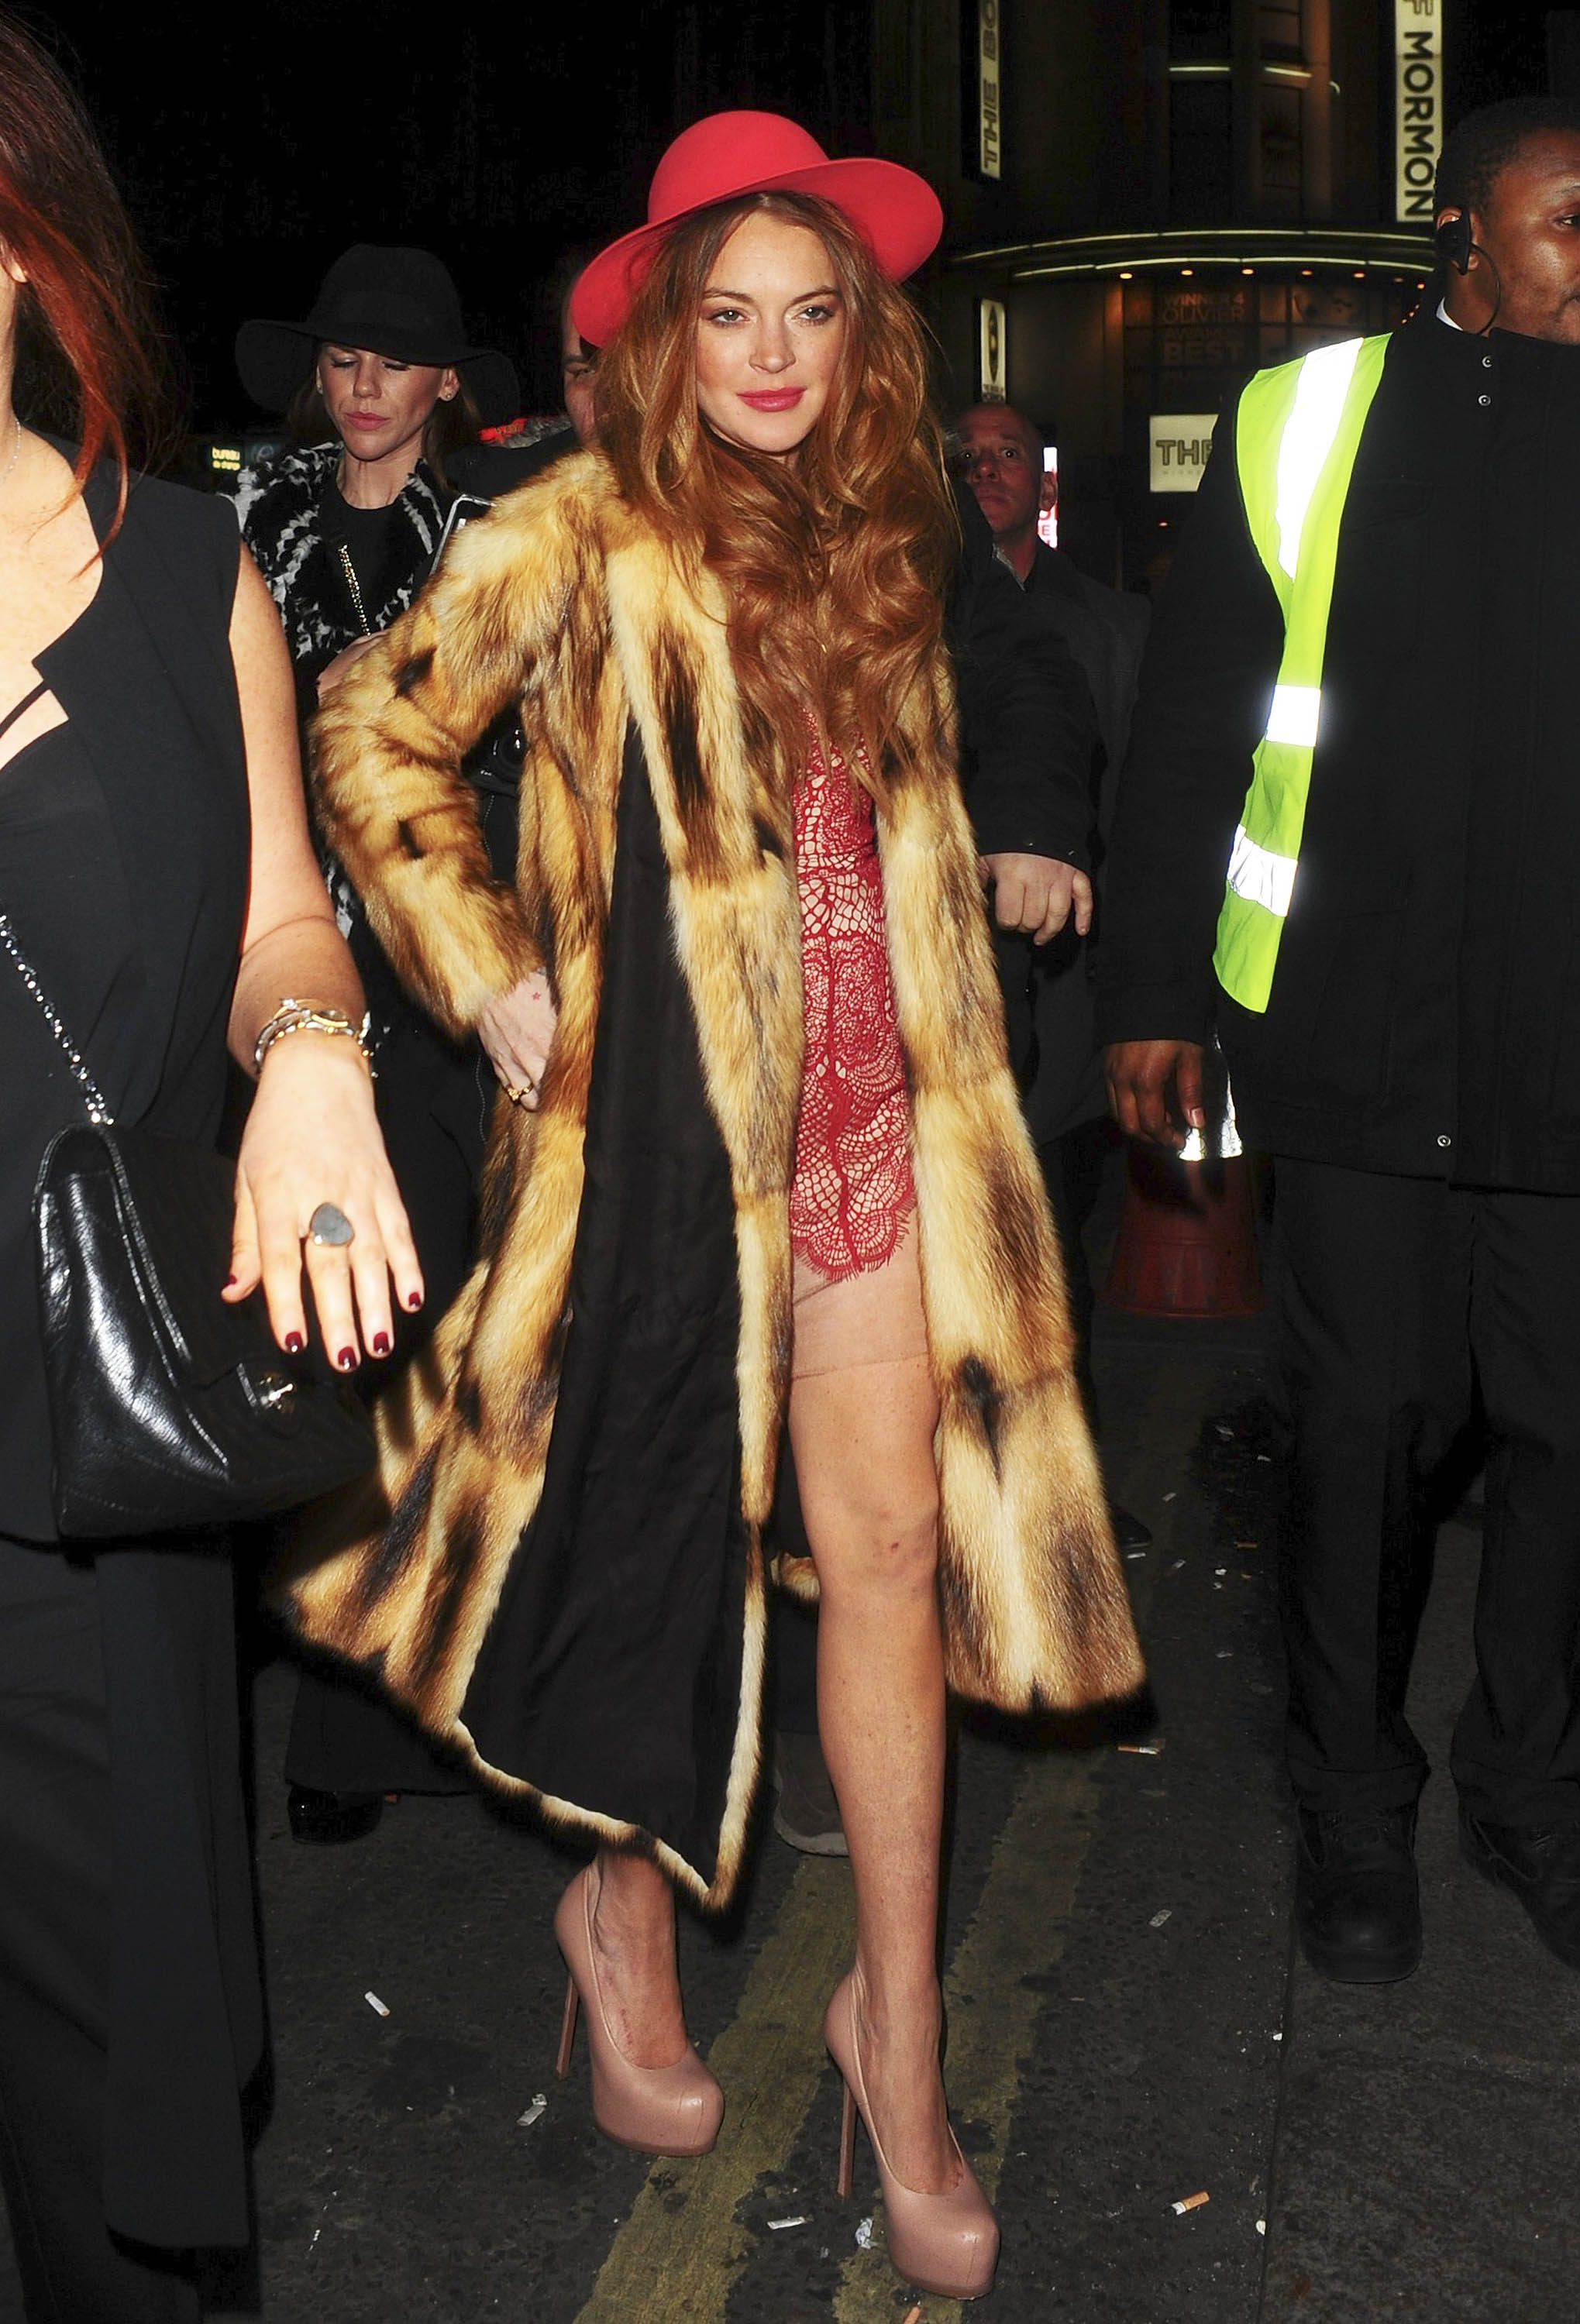 Lindsay Lohan Enjoys A Night Out In London